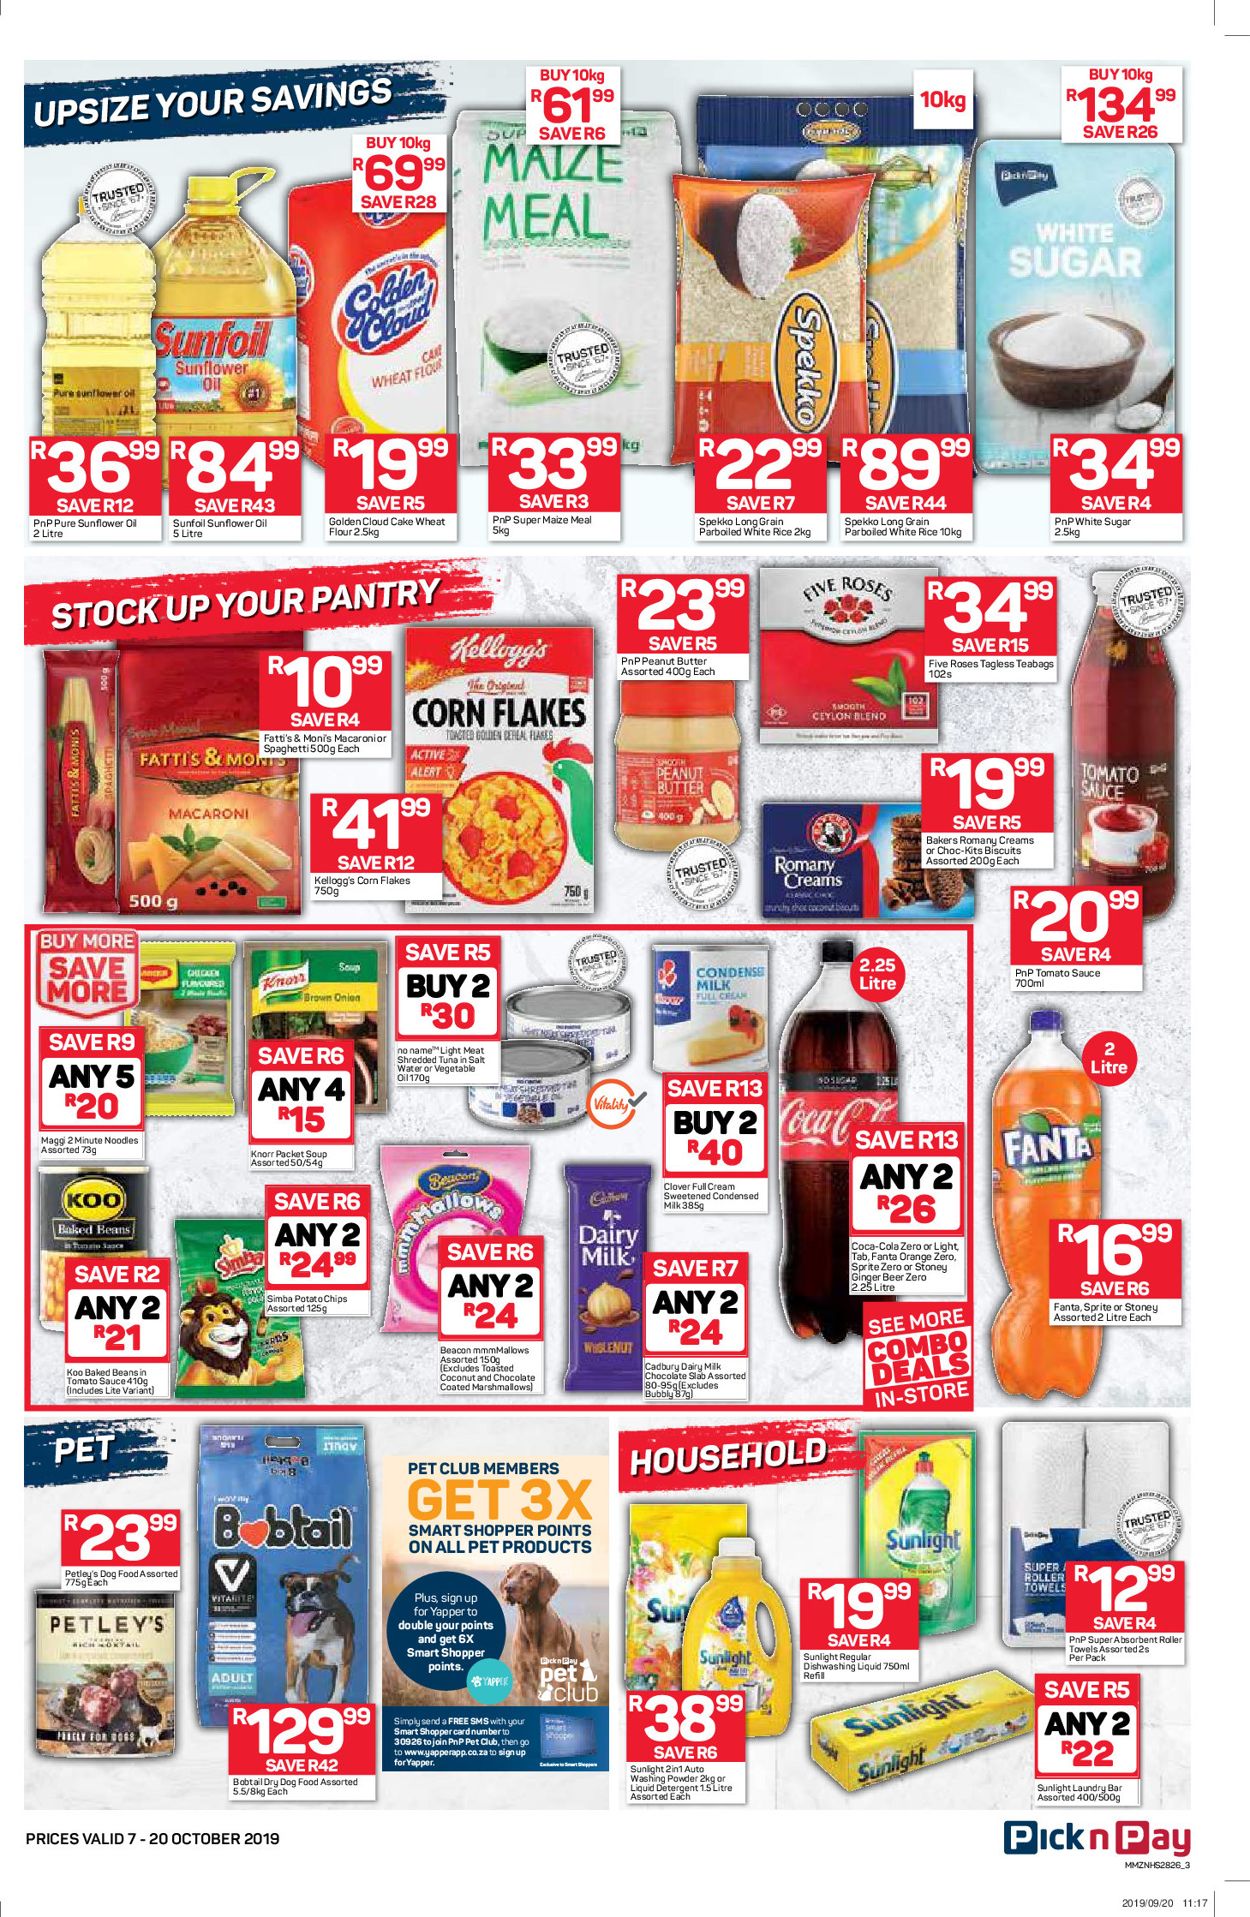 Pick n Pay Catalogue - 2019/10/07-2019/10/20 (Page 4)